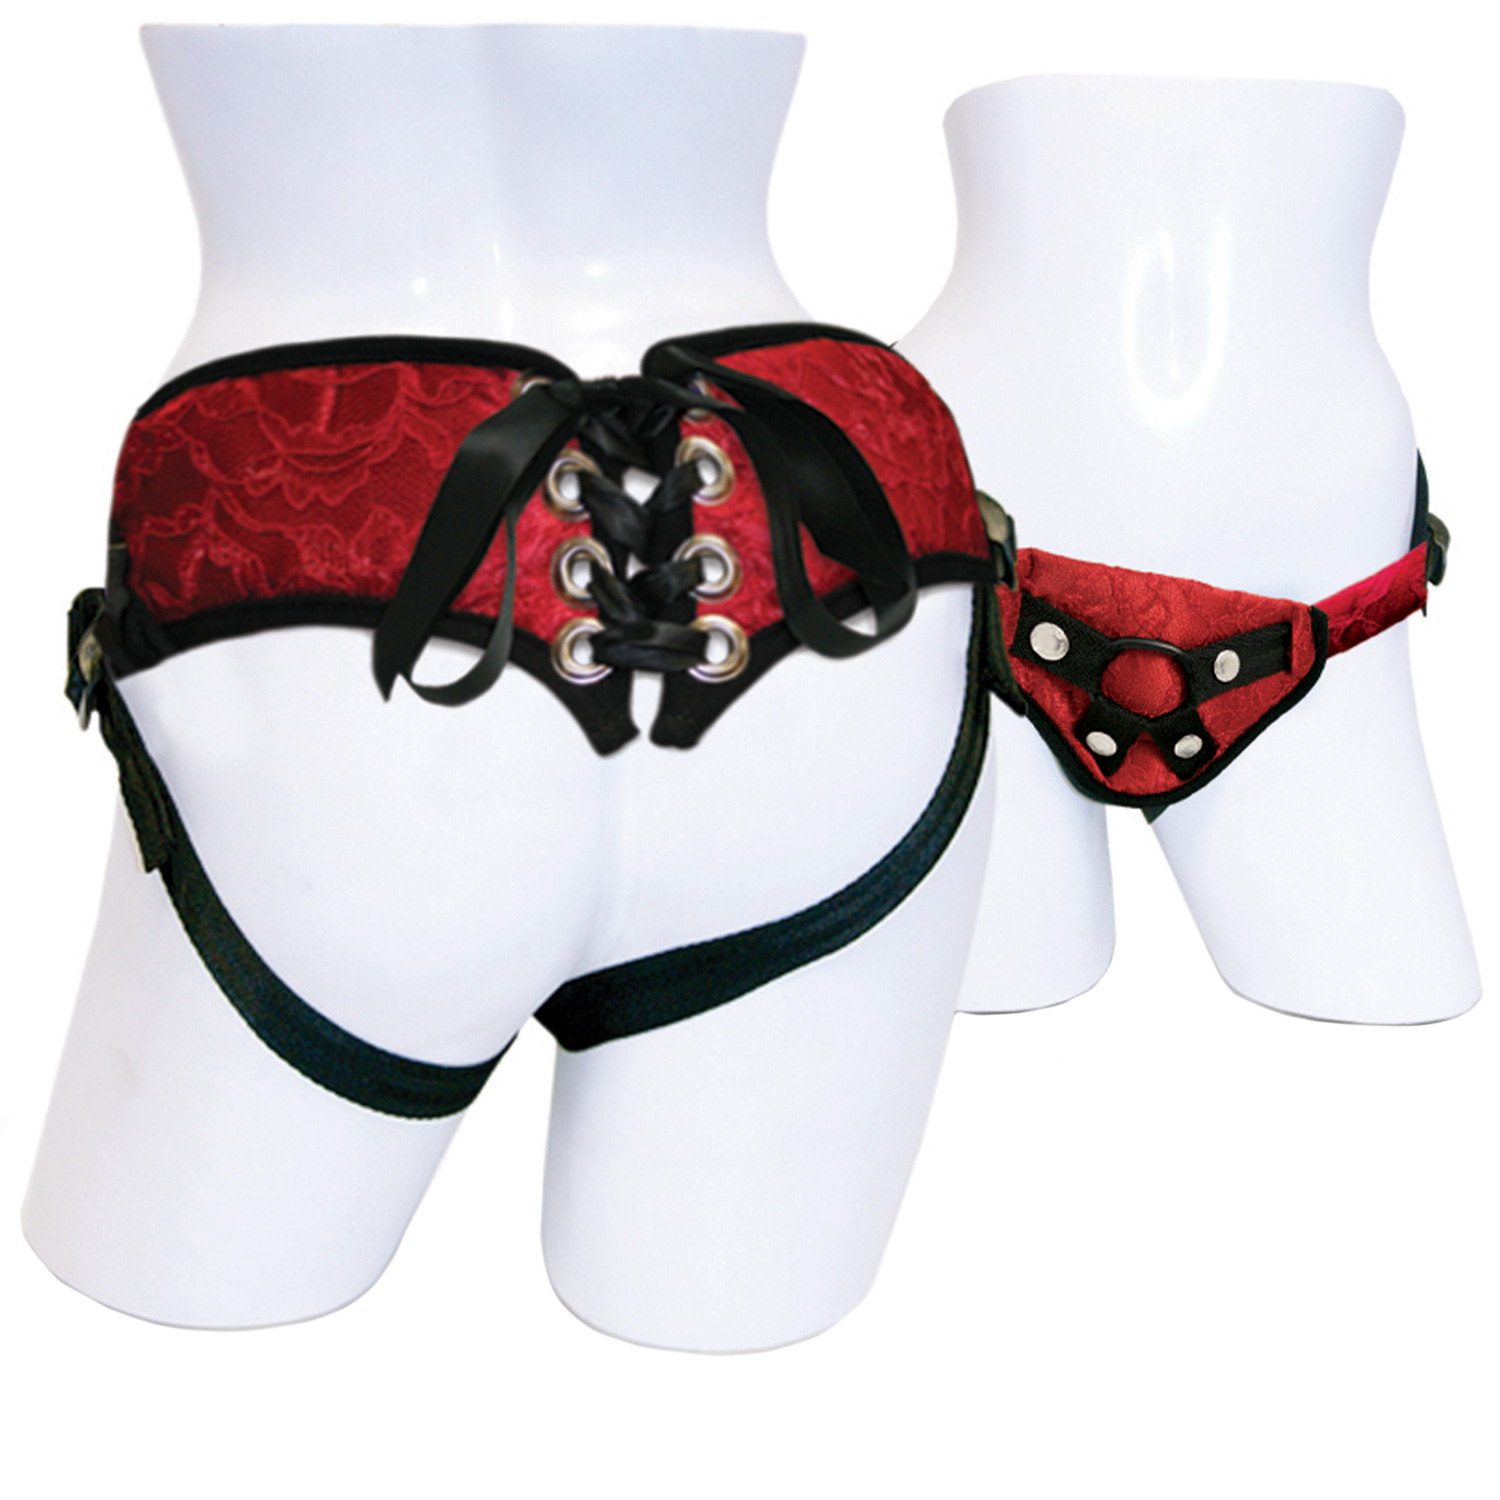 8: Sportsheets Red Lace Korset Strap-On Harness     - Red